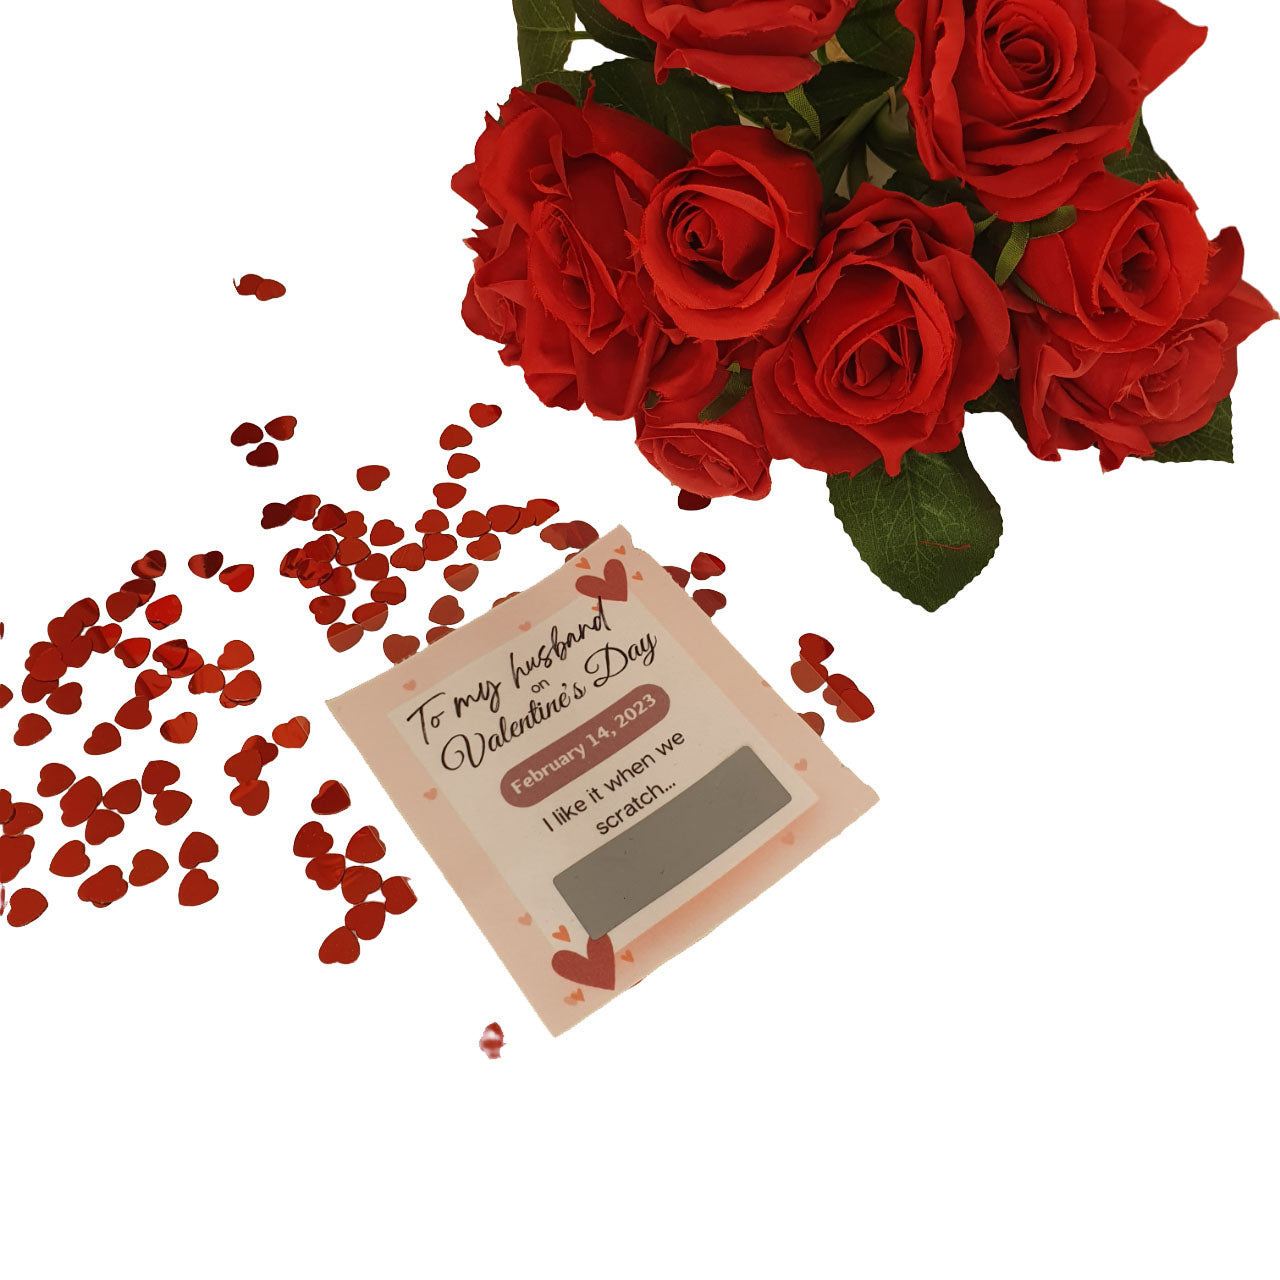 valentines scratchcard in scene with red flowers and heart confetti